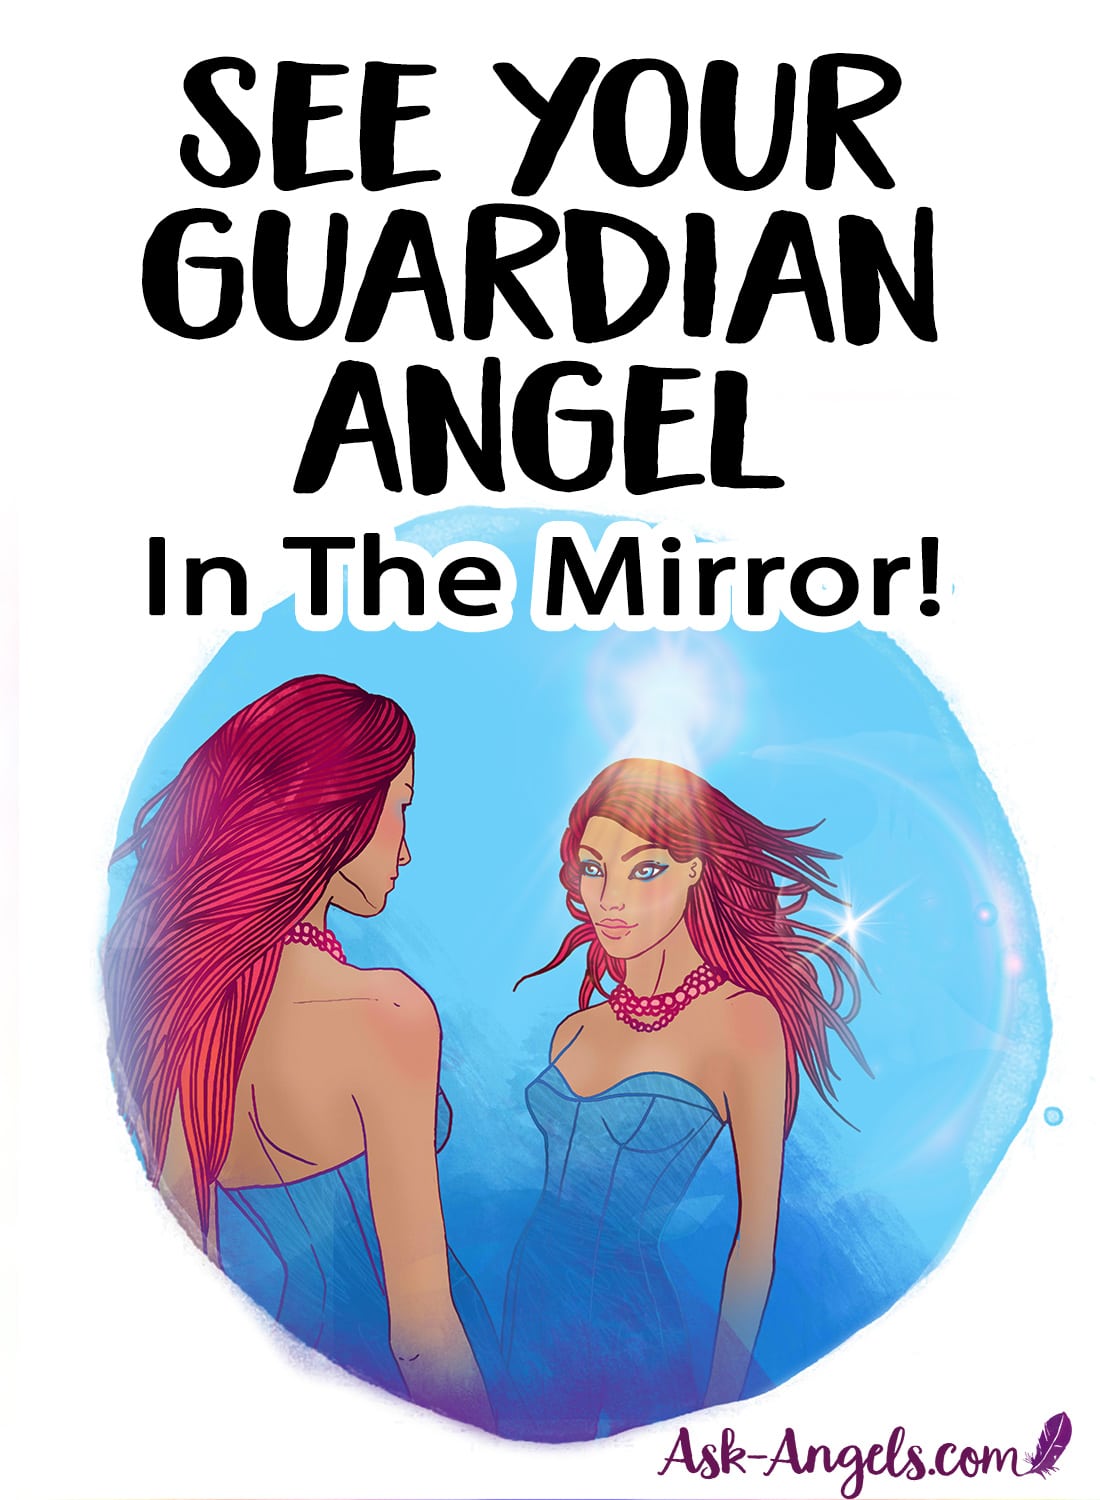 See Your Guardian Angel in The Mirror!